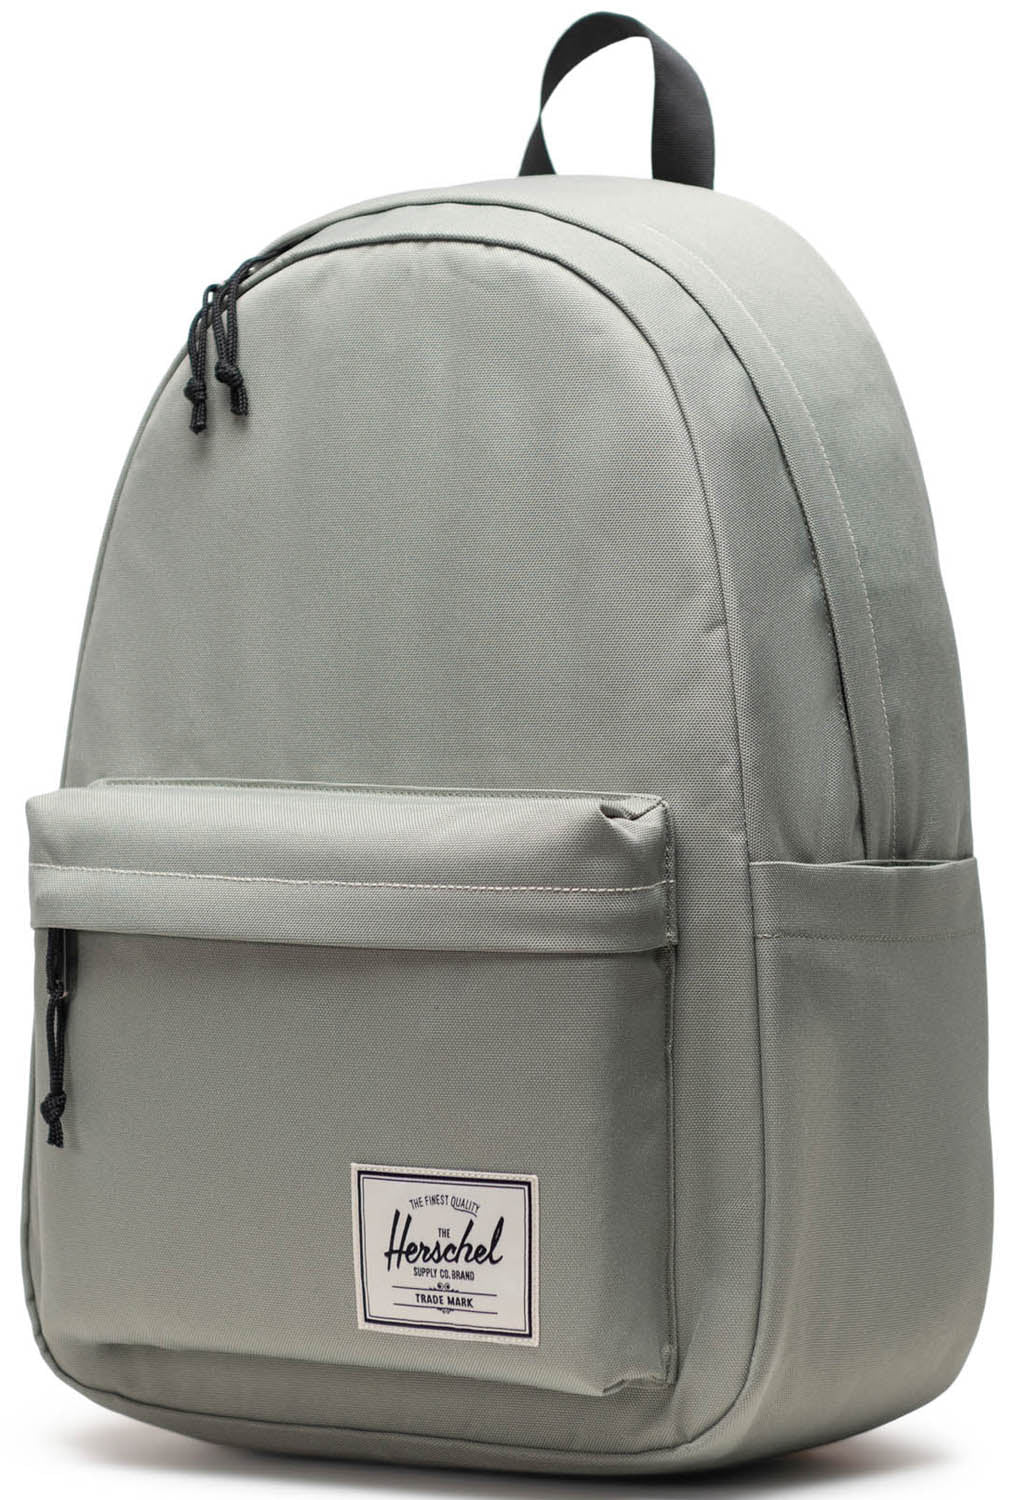 Herschel Classic X-Large Backpack - Seagrass / White Stitch